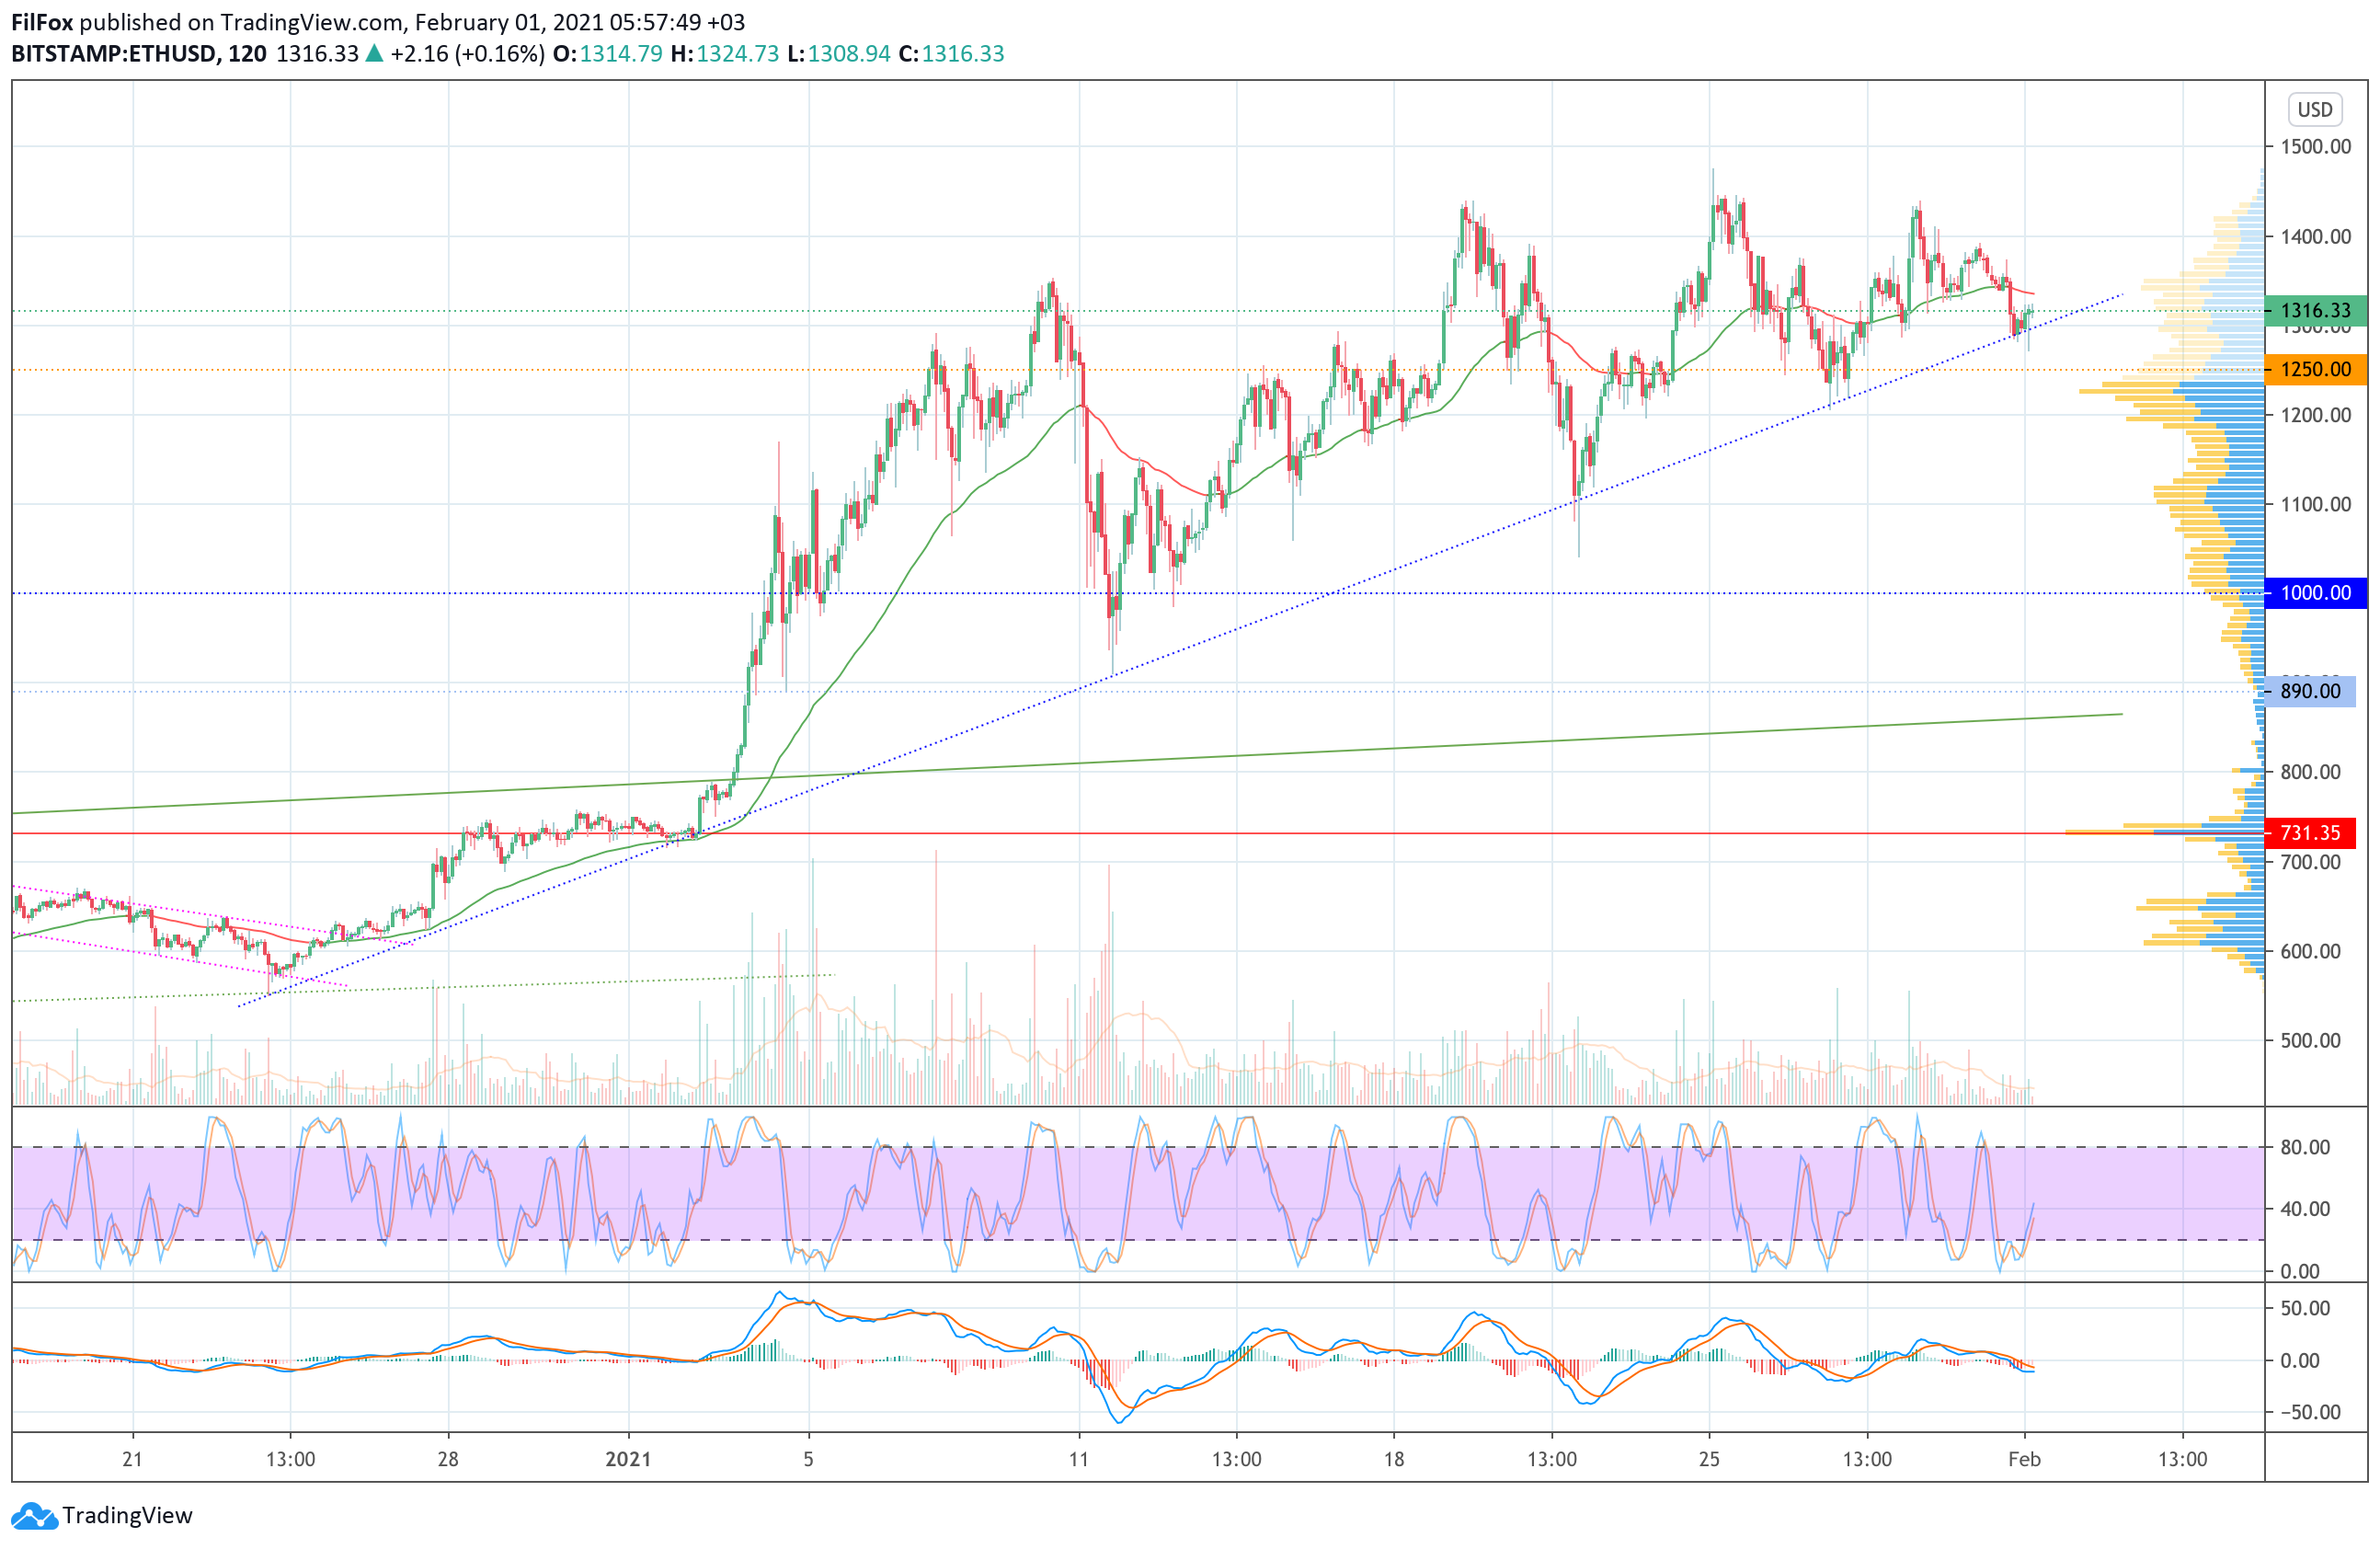 Analysis of prices for Bitcoin, Ethereum, Ripple for 02/01/2021